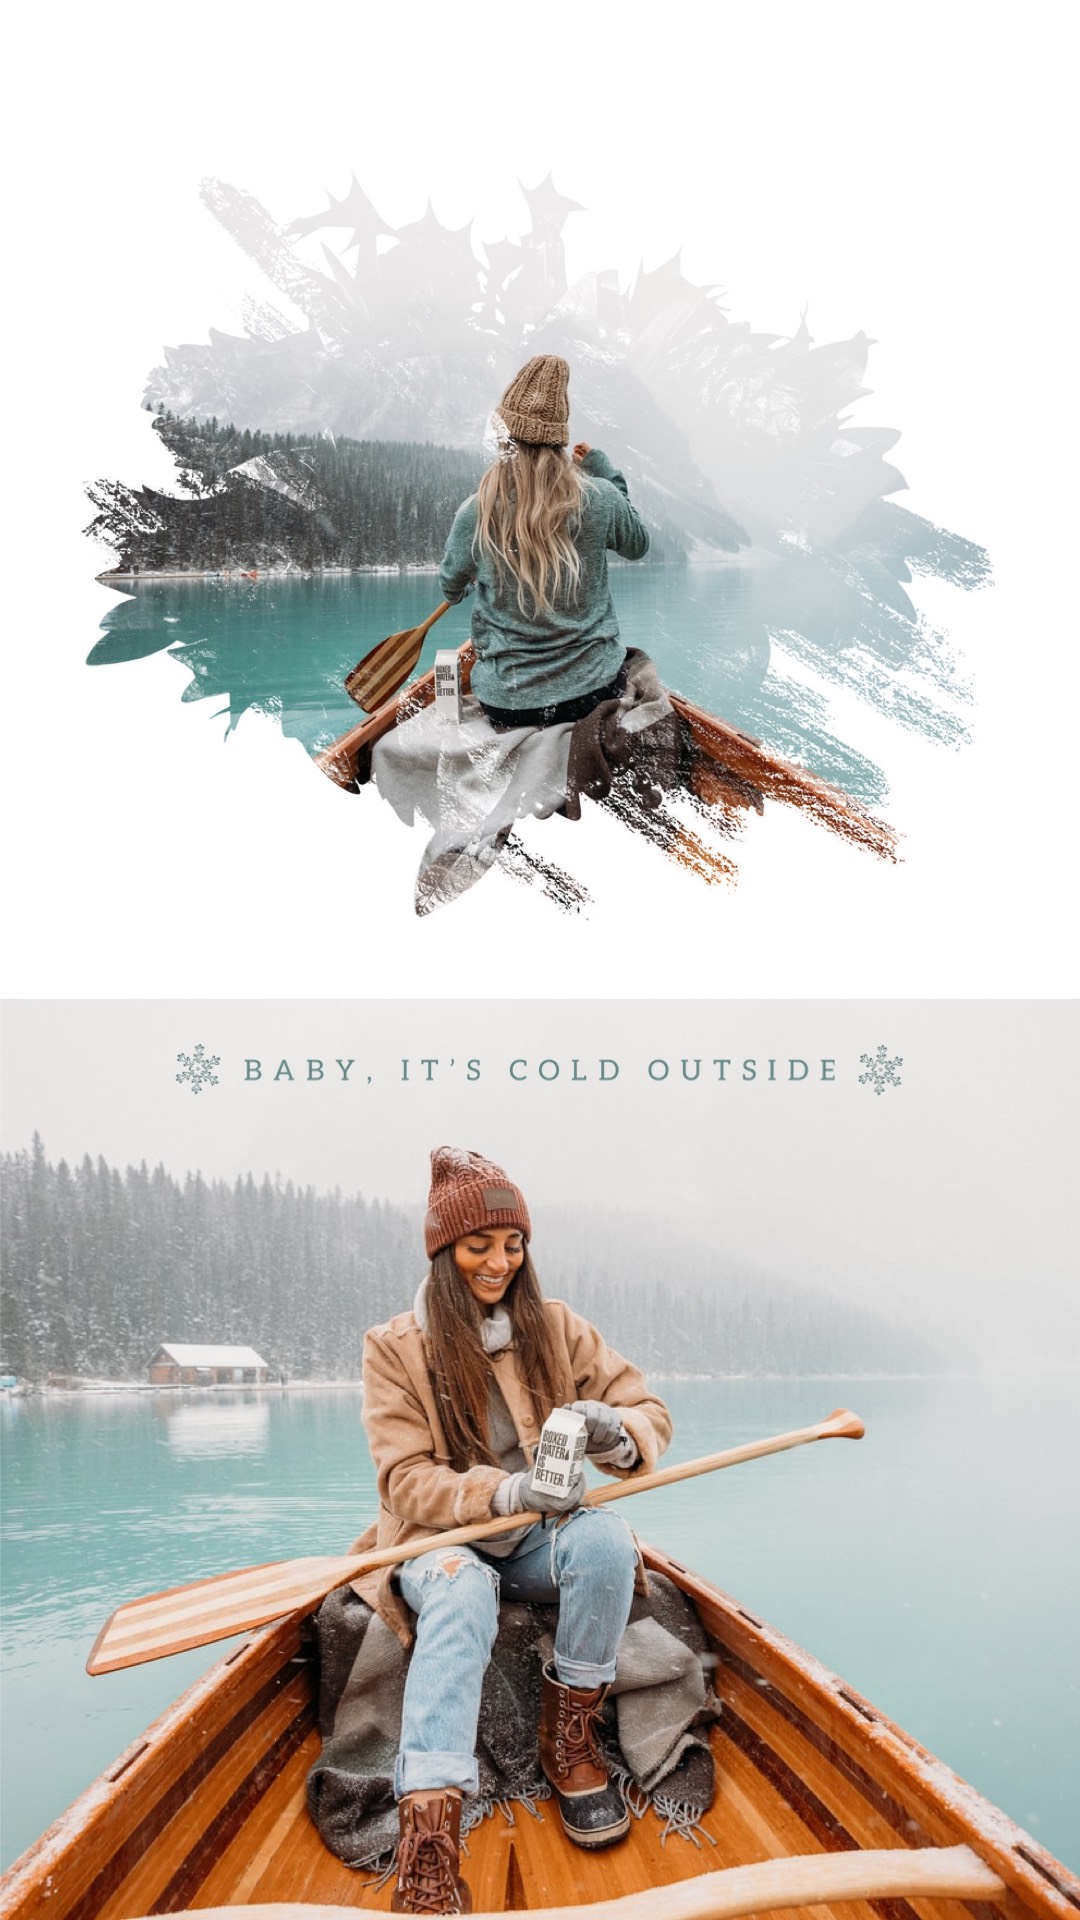 Baby, it's cold outside! Woman on a boat in the lake Winter Story template